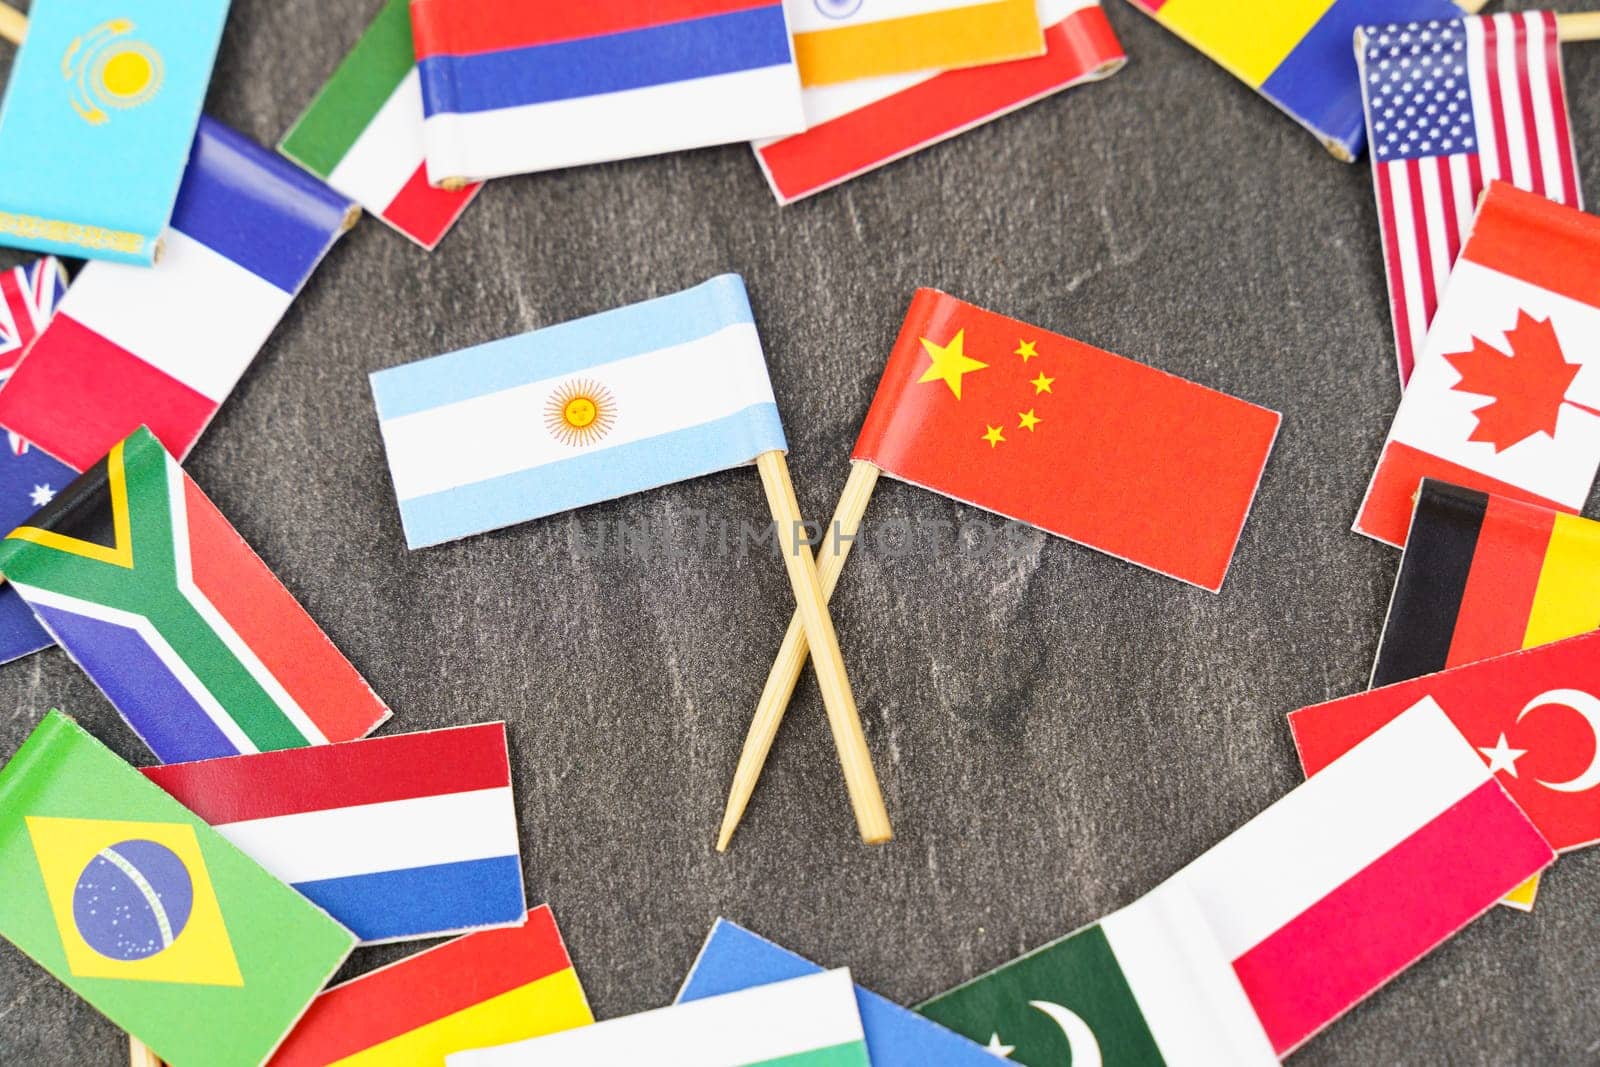 Policy. National flags of different countries. The concept is diplomacy. In the middle among the various flags are two flags - China, Argentina